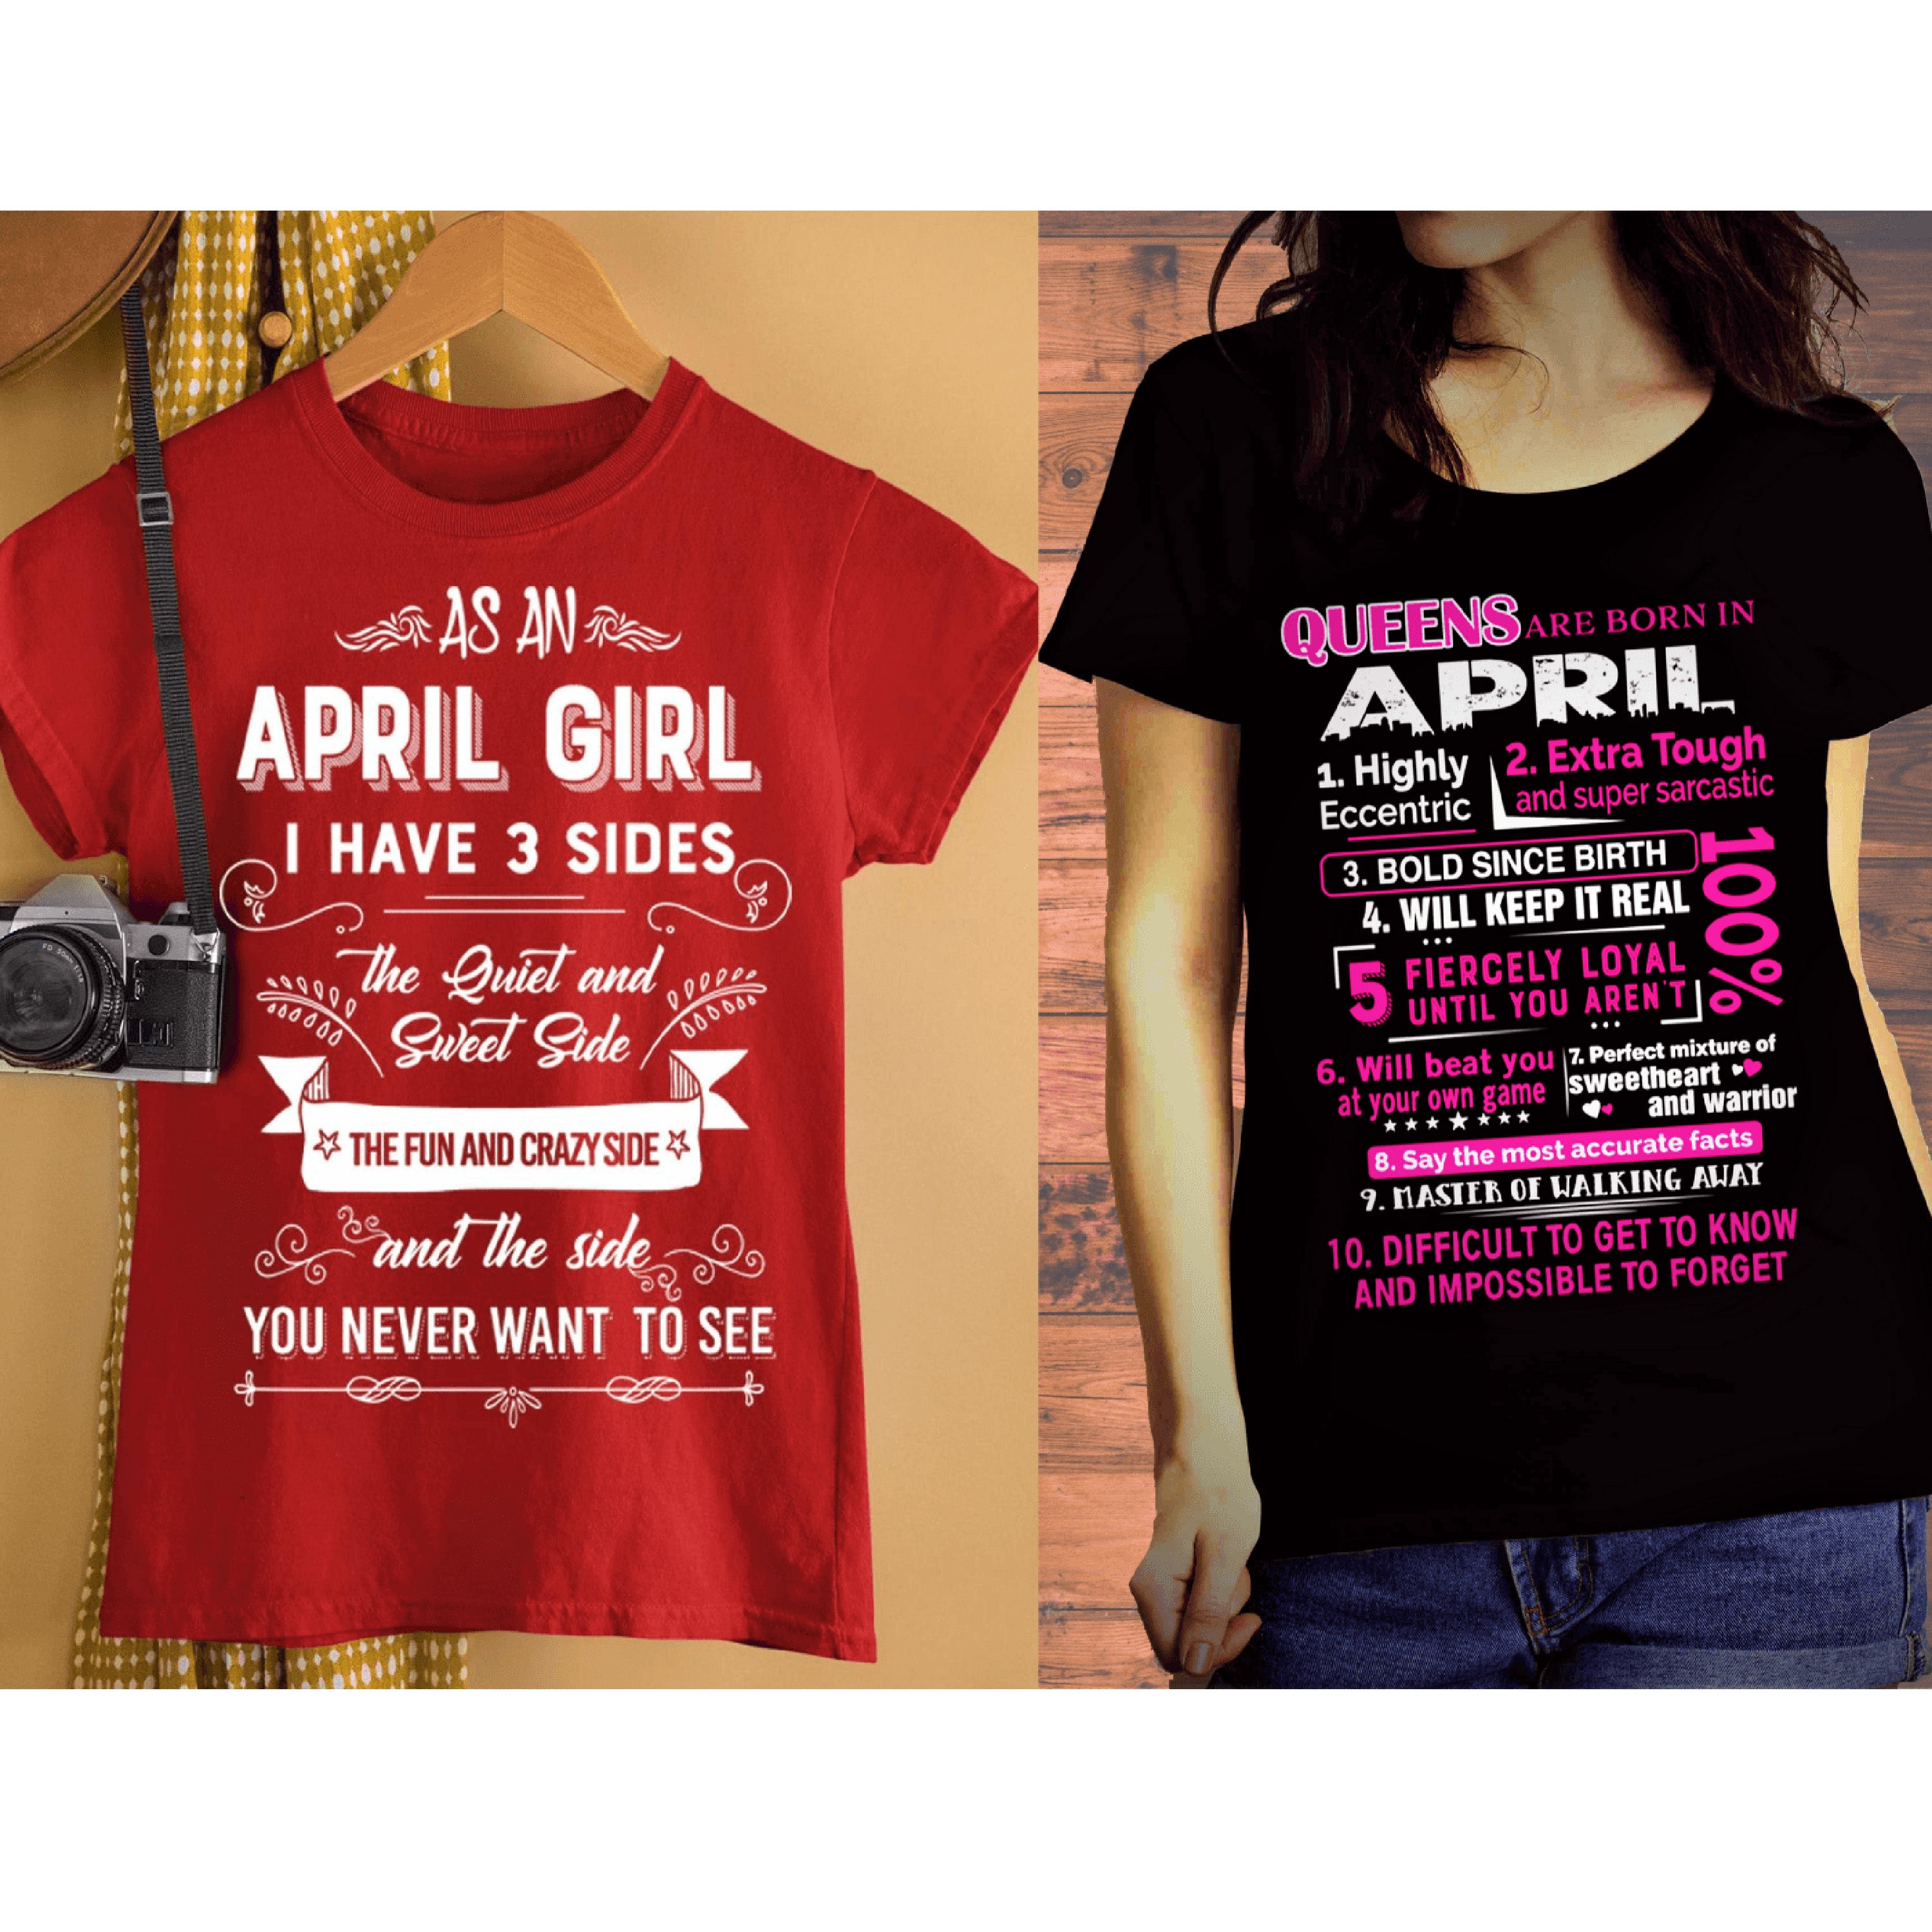 "APRIL- Queens + 3 Sides -Pack of 2"(Red & Black)